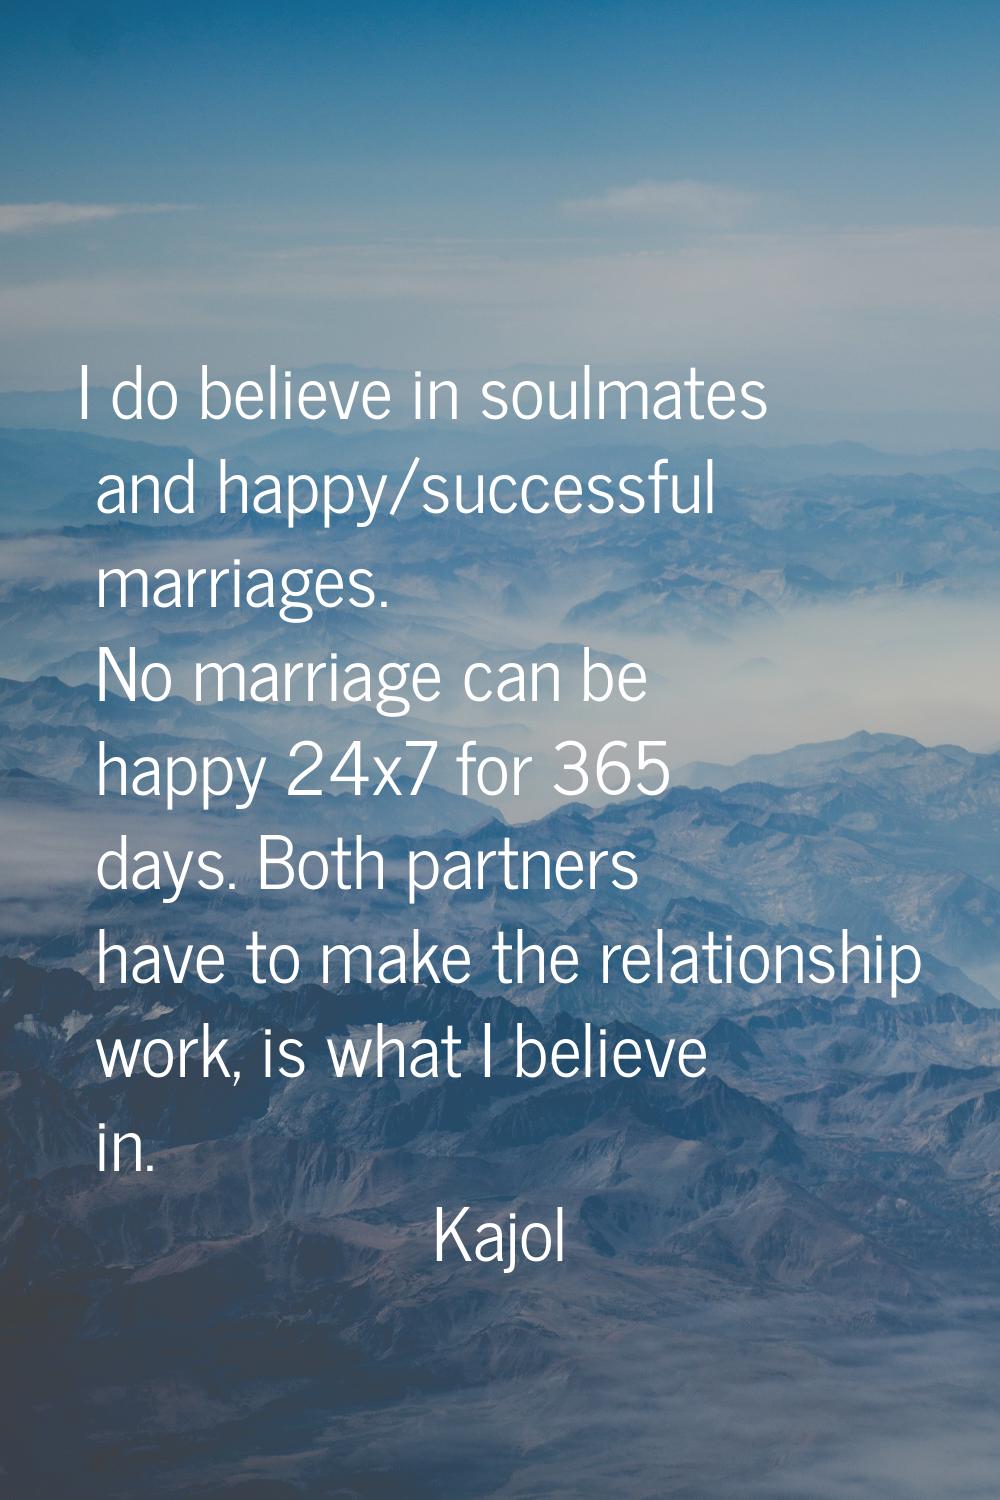 I do believe in soulmates and happy/successful marriages. No marriage can be happy 24x7 for 365 day